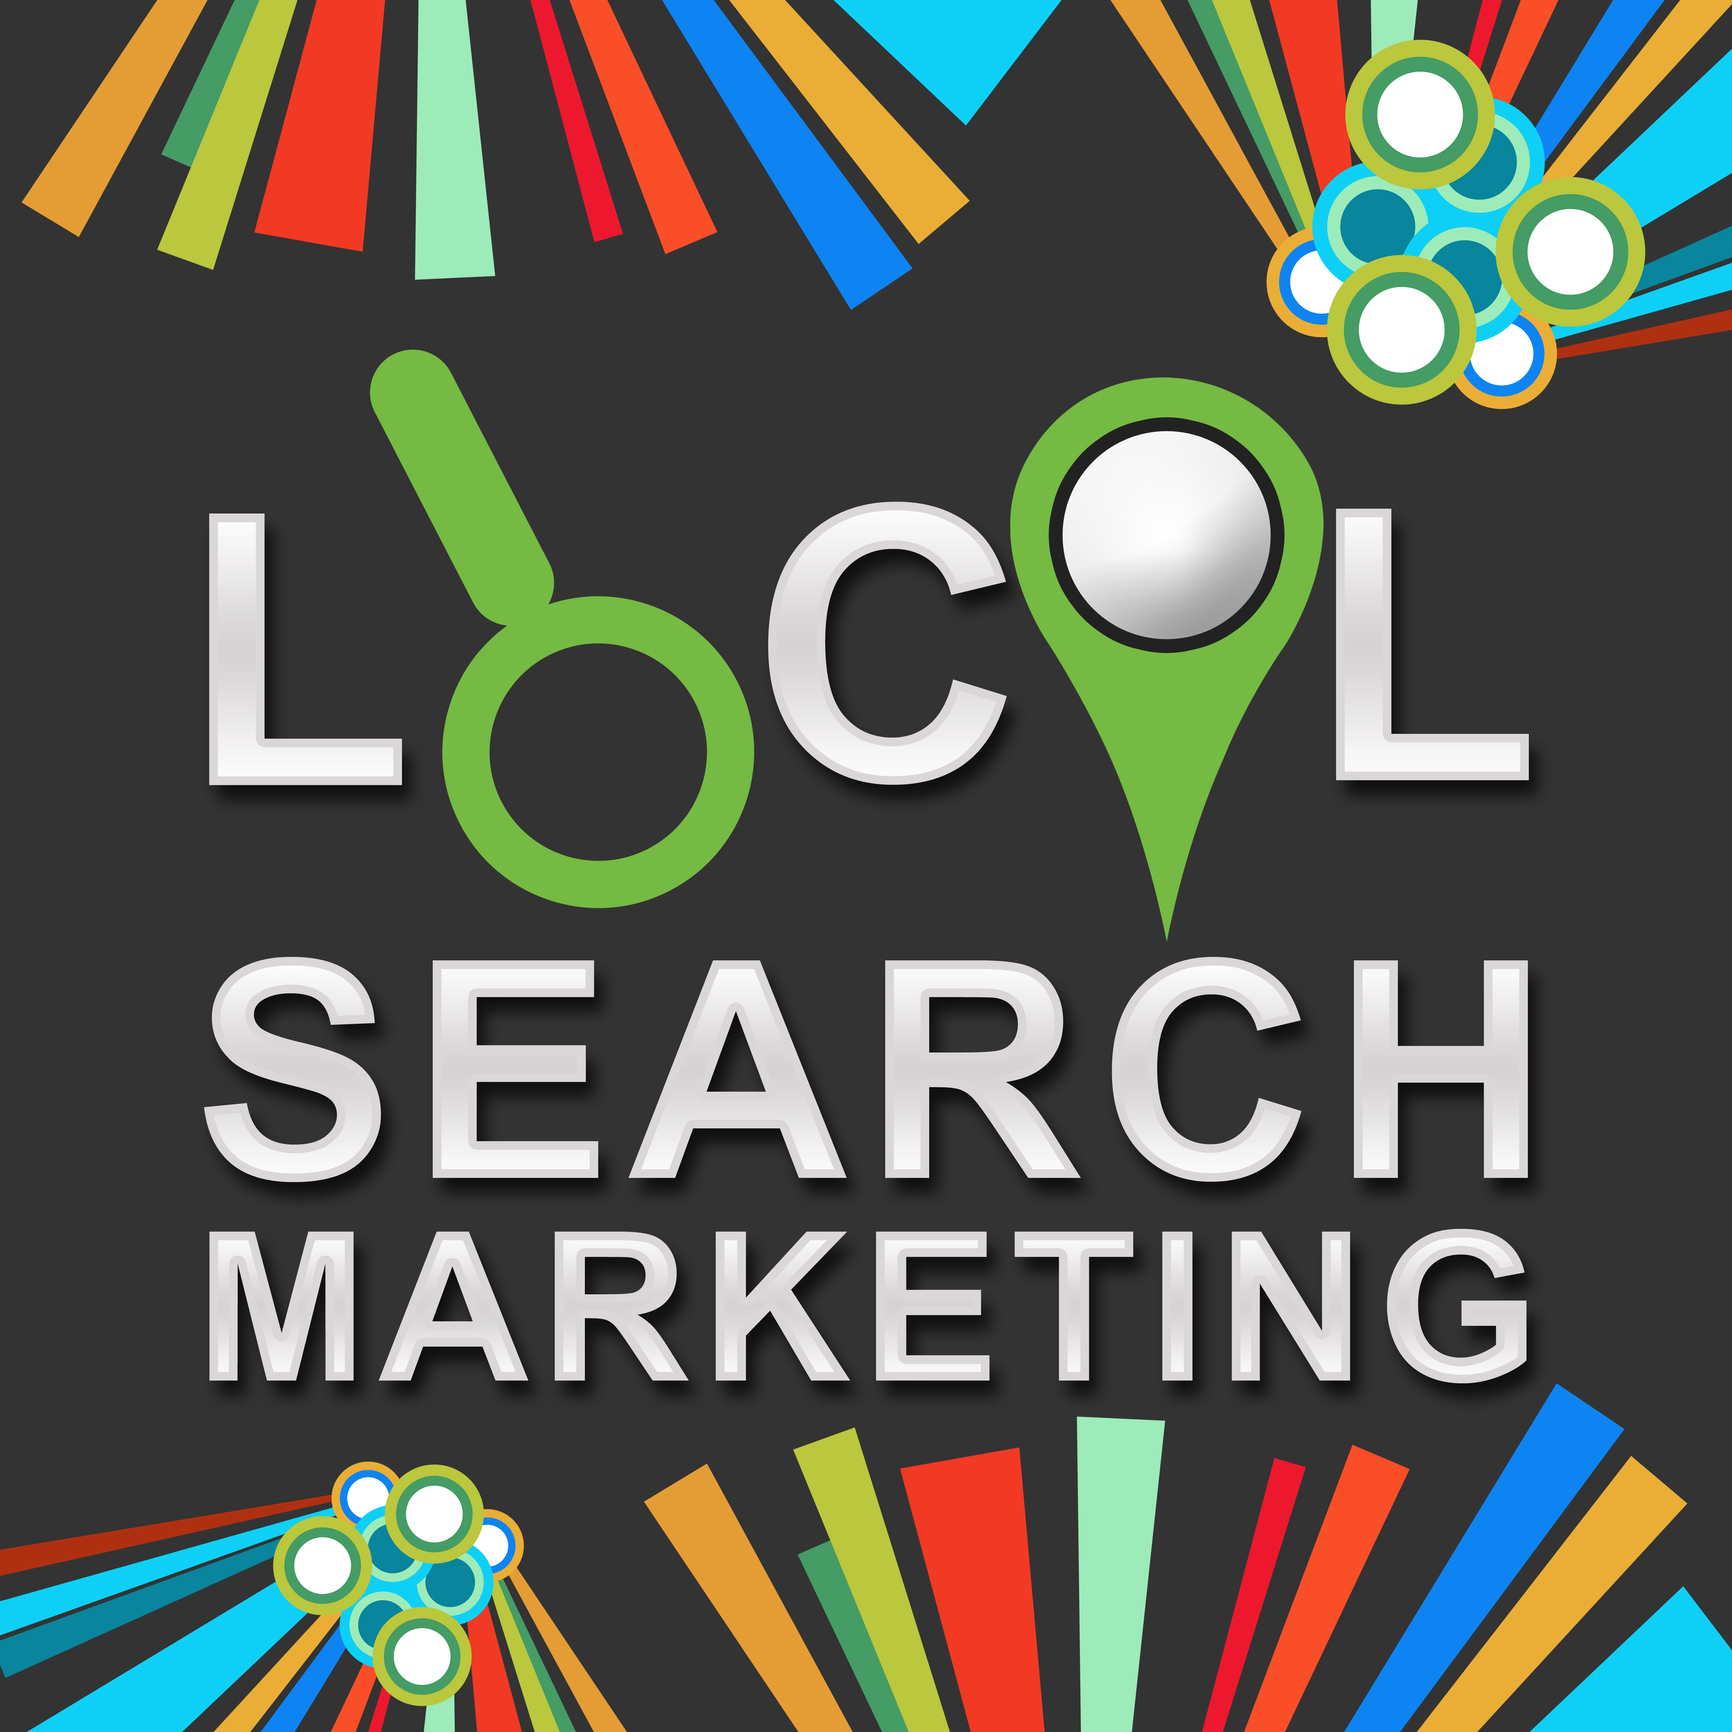 Why is Local Search and SEO Important?